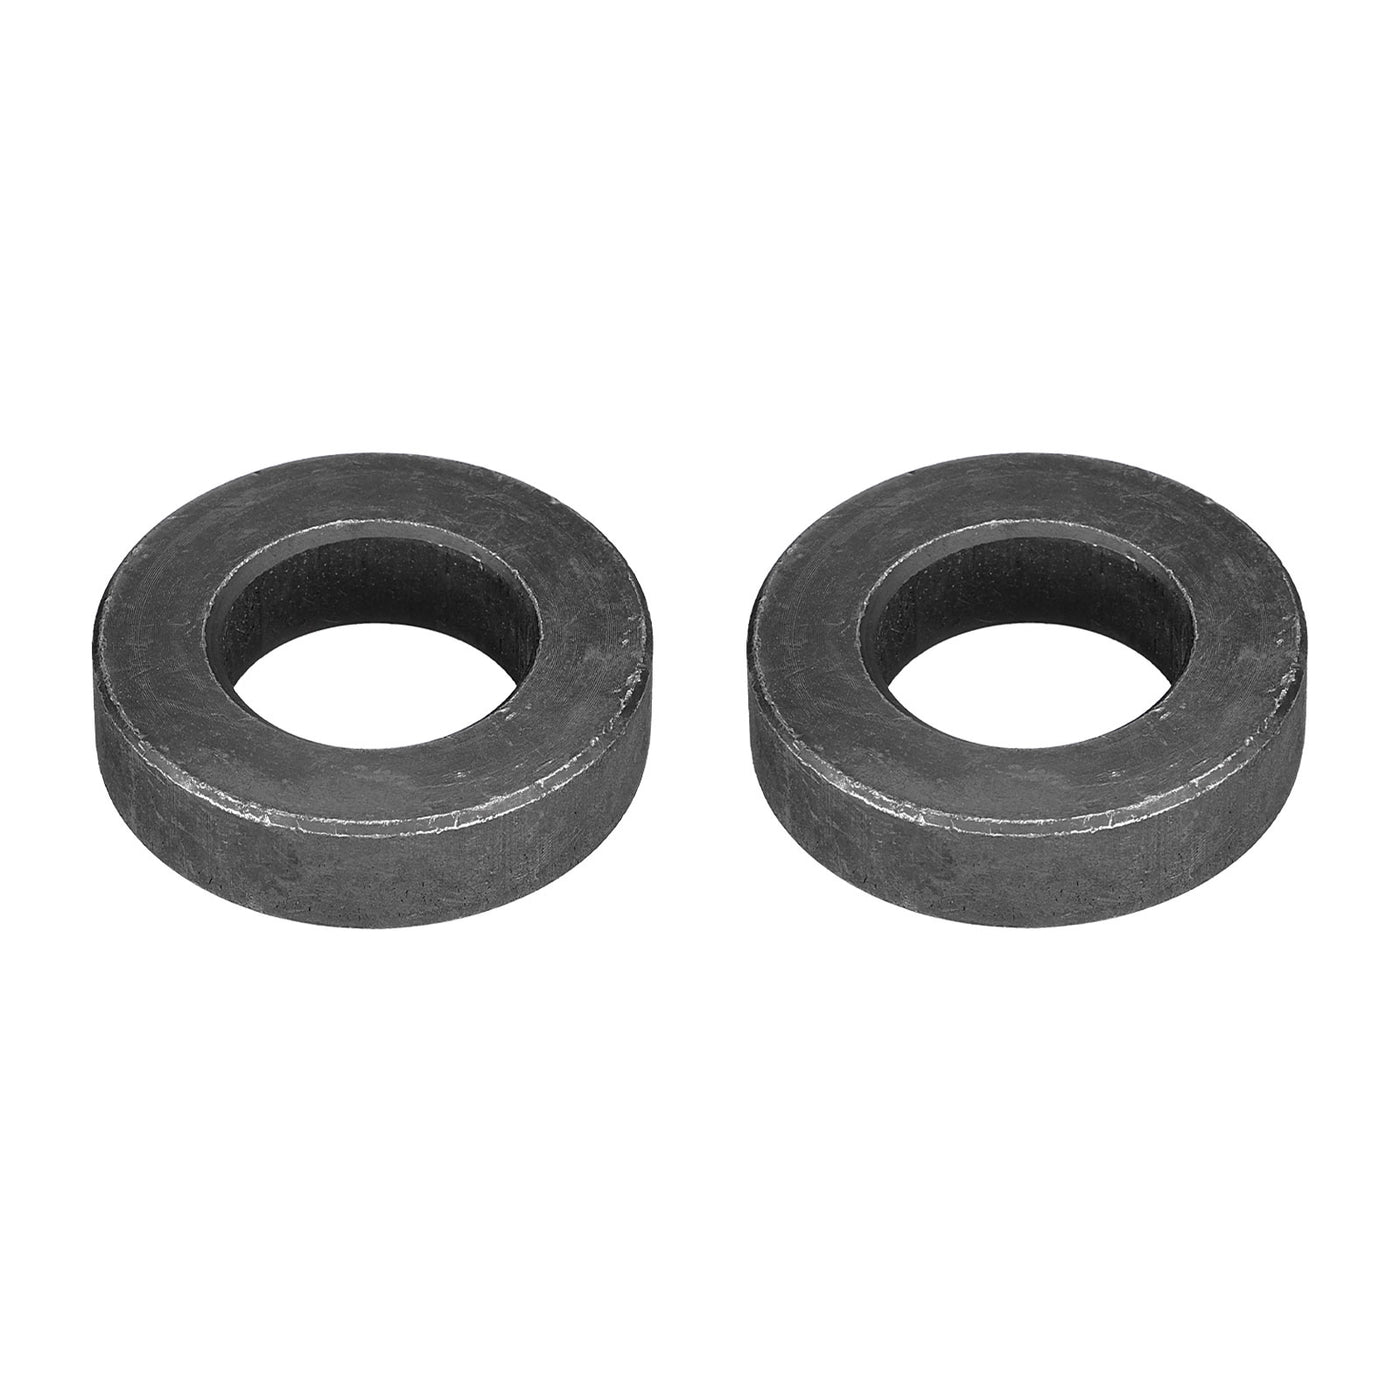 uxcell Uxcell M22 Carbon Steel Flat Washer 2pcs 23x42x11mm Grade 8.8 Alloy Steel Fasteners